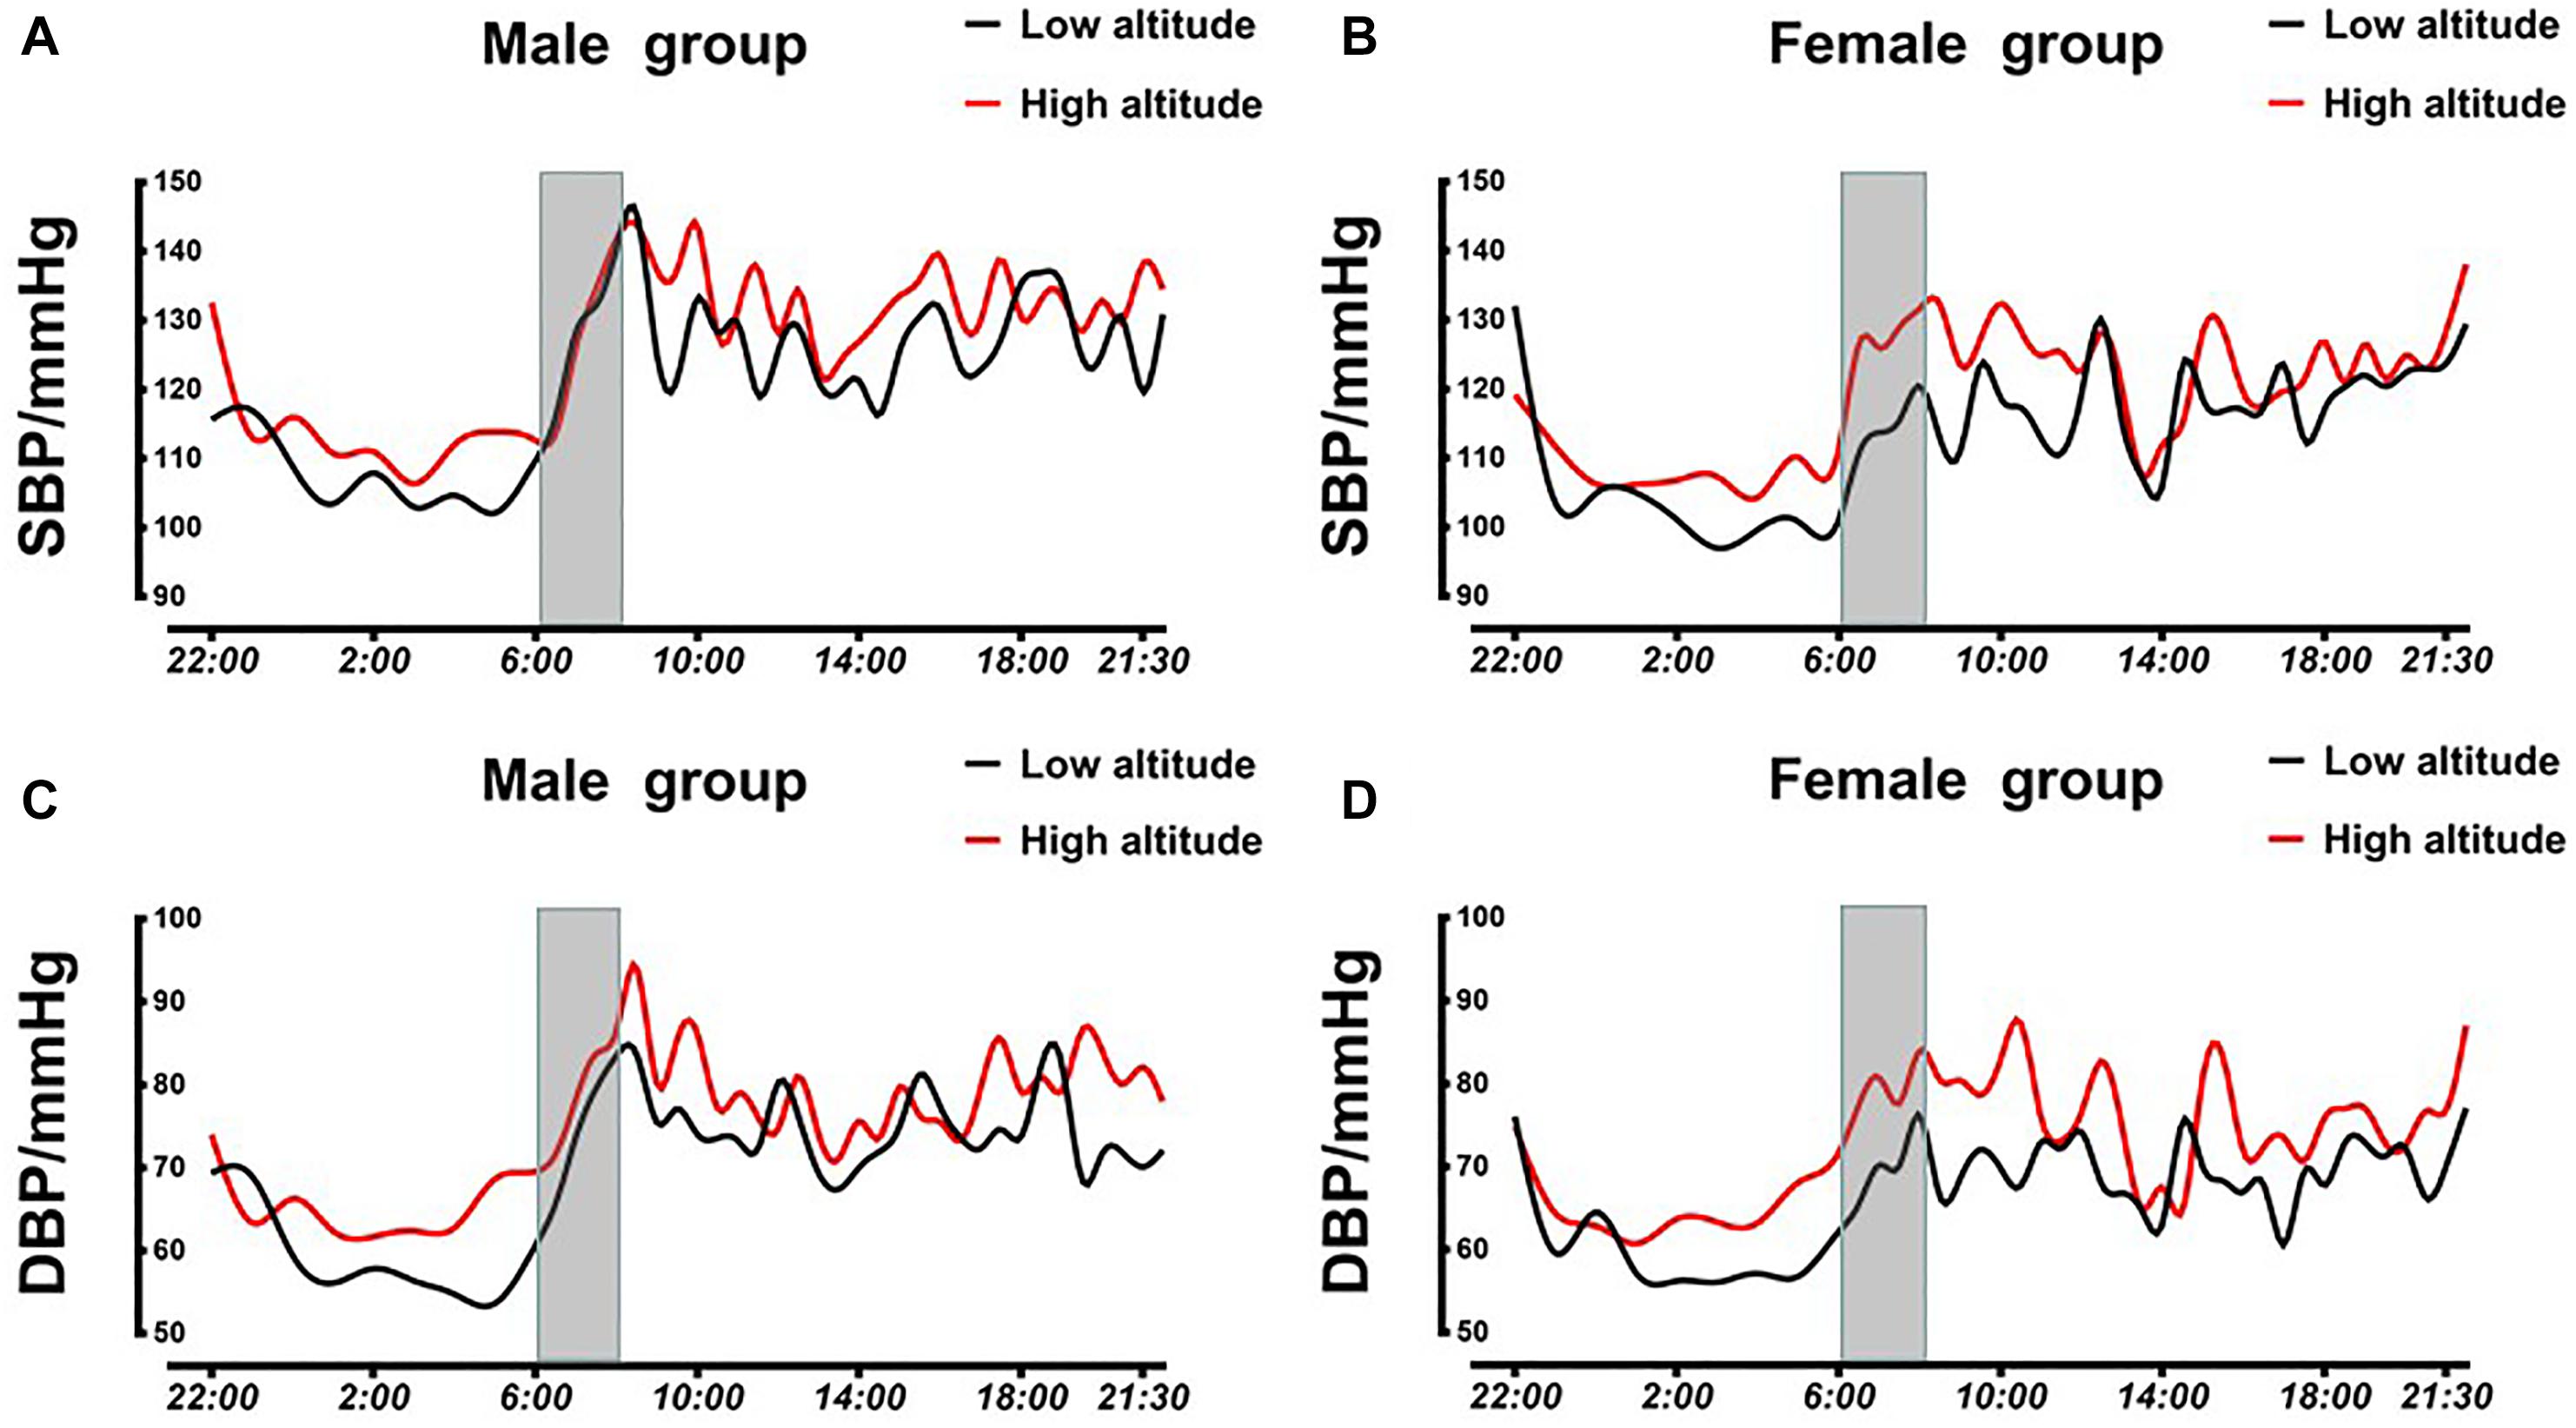 Frontiers Sex Dependent Association Between Early Morning Ambulatory